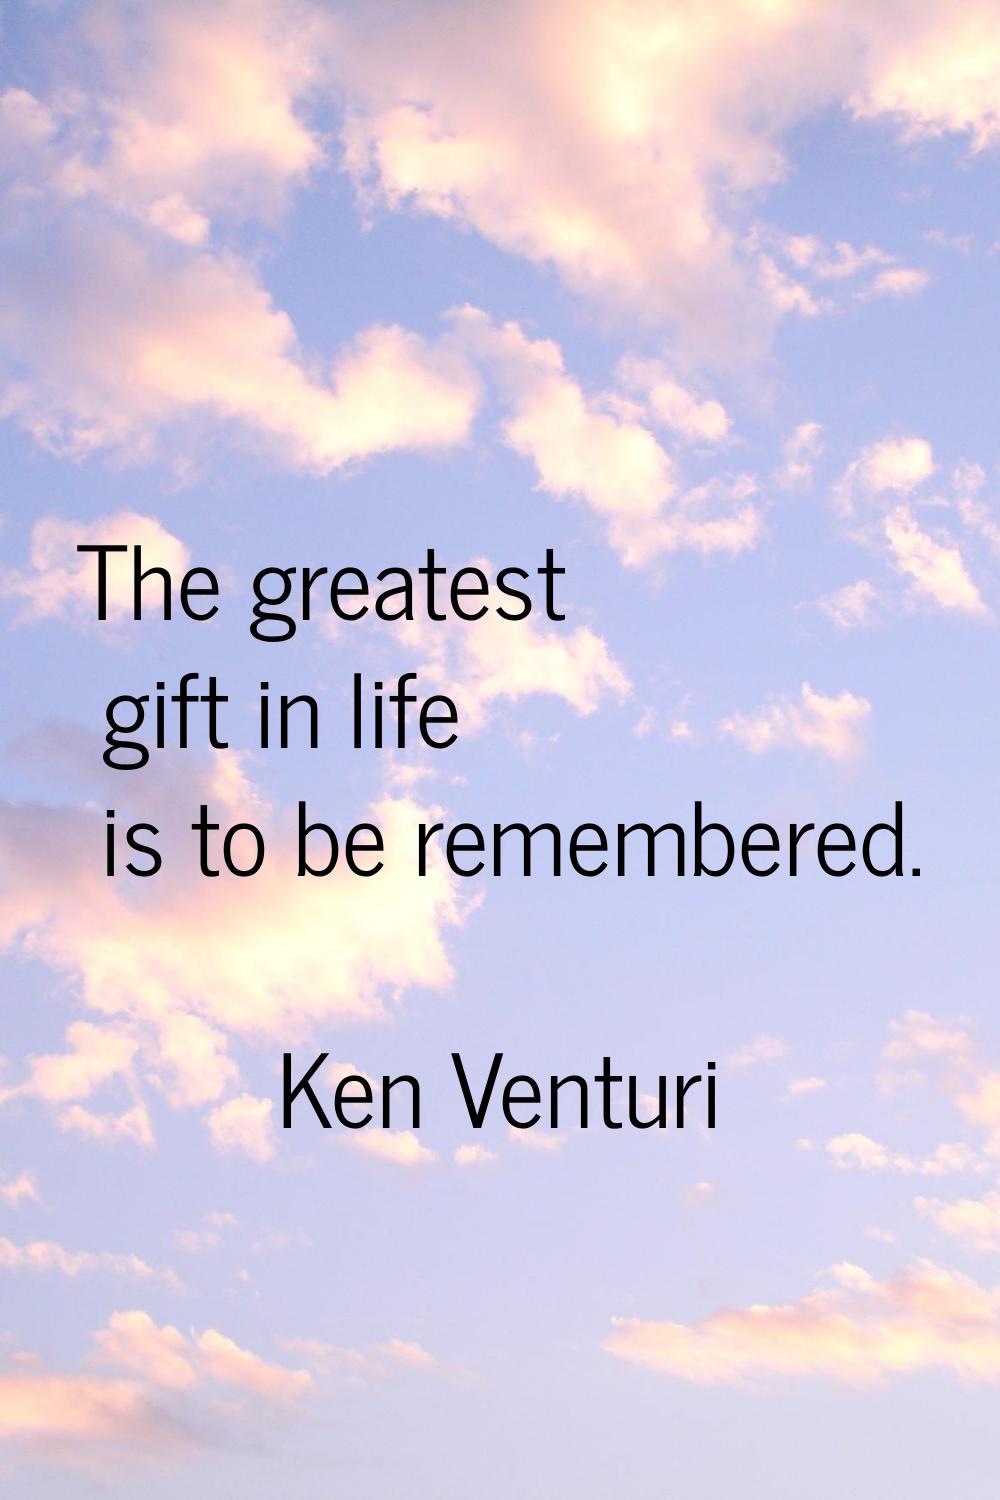 The greatest gift in life is to be remembered.